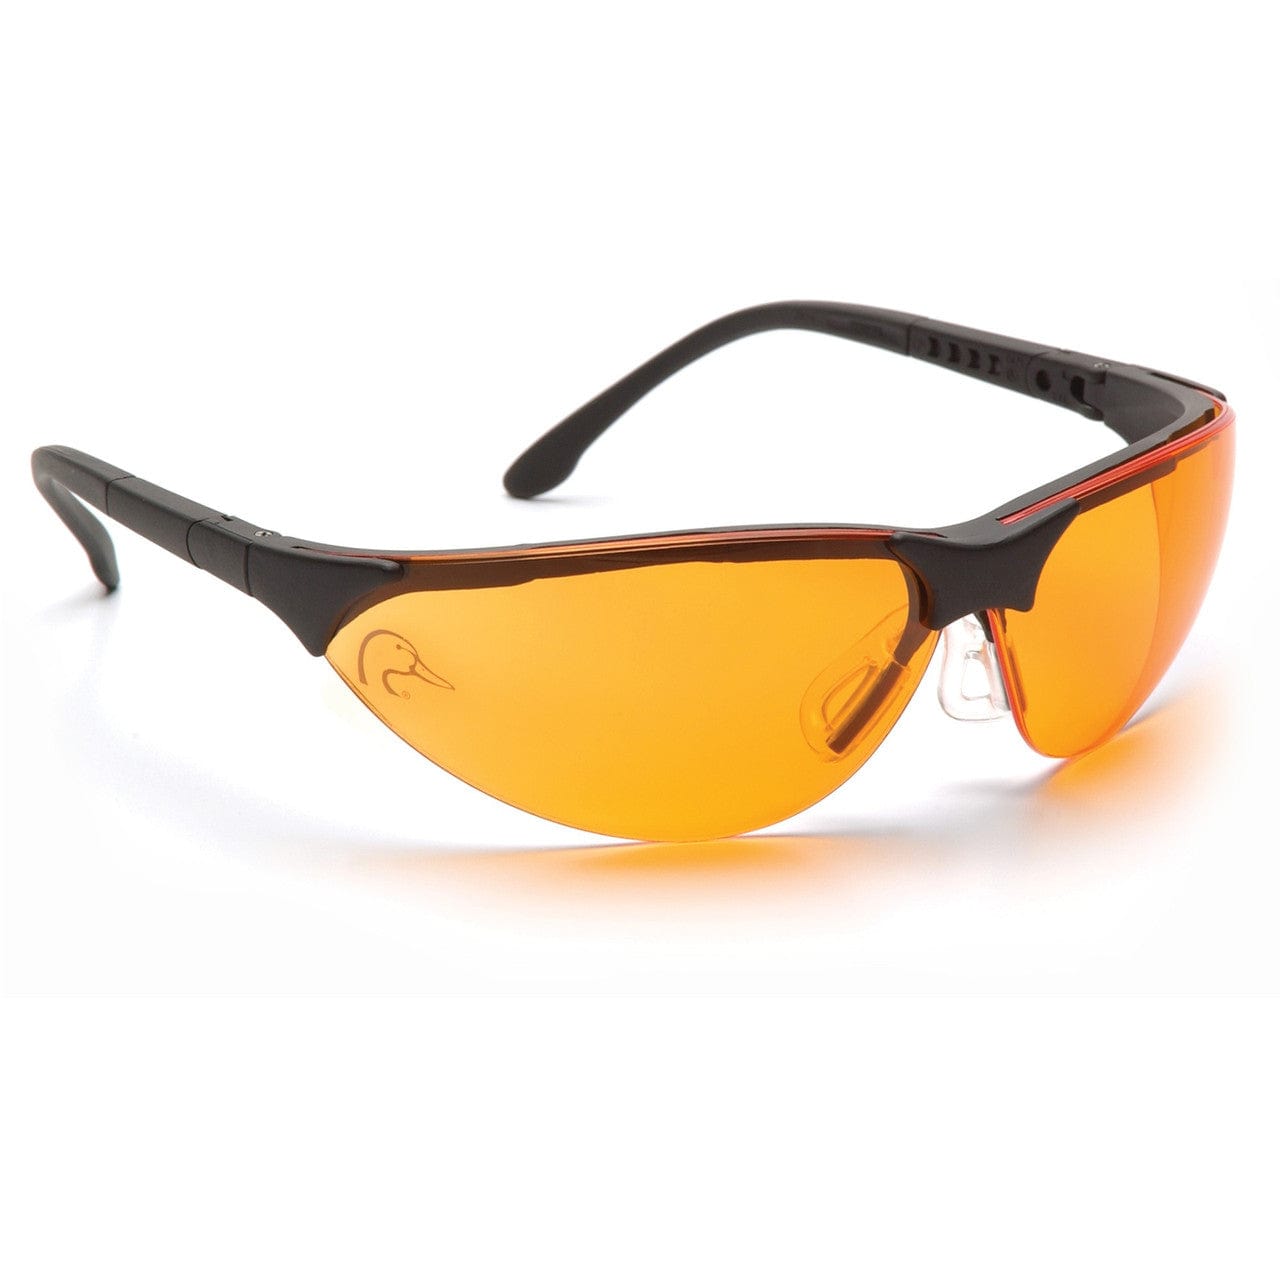 Ducks Unlimited Safety Glasses Closeup DUCAB